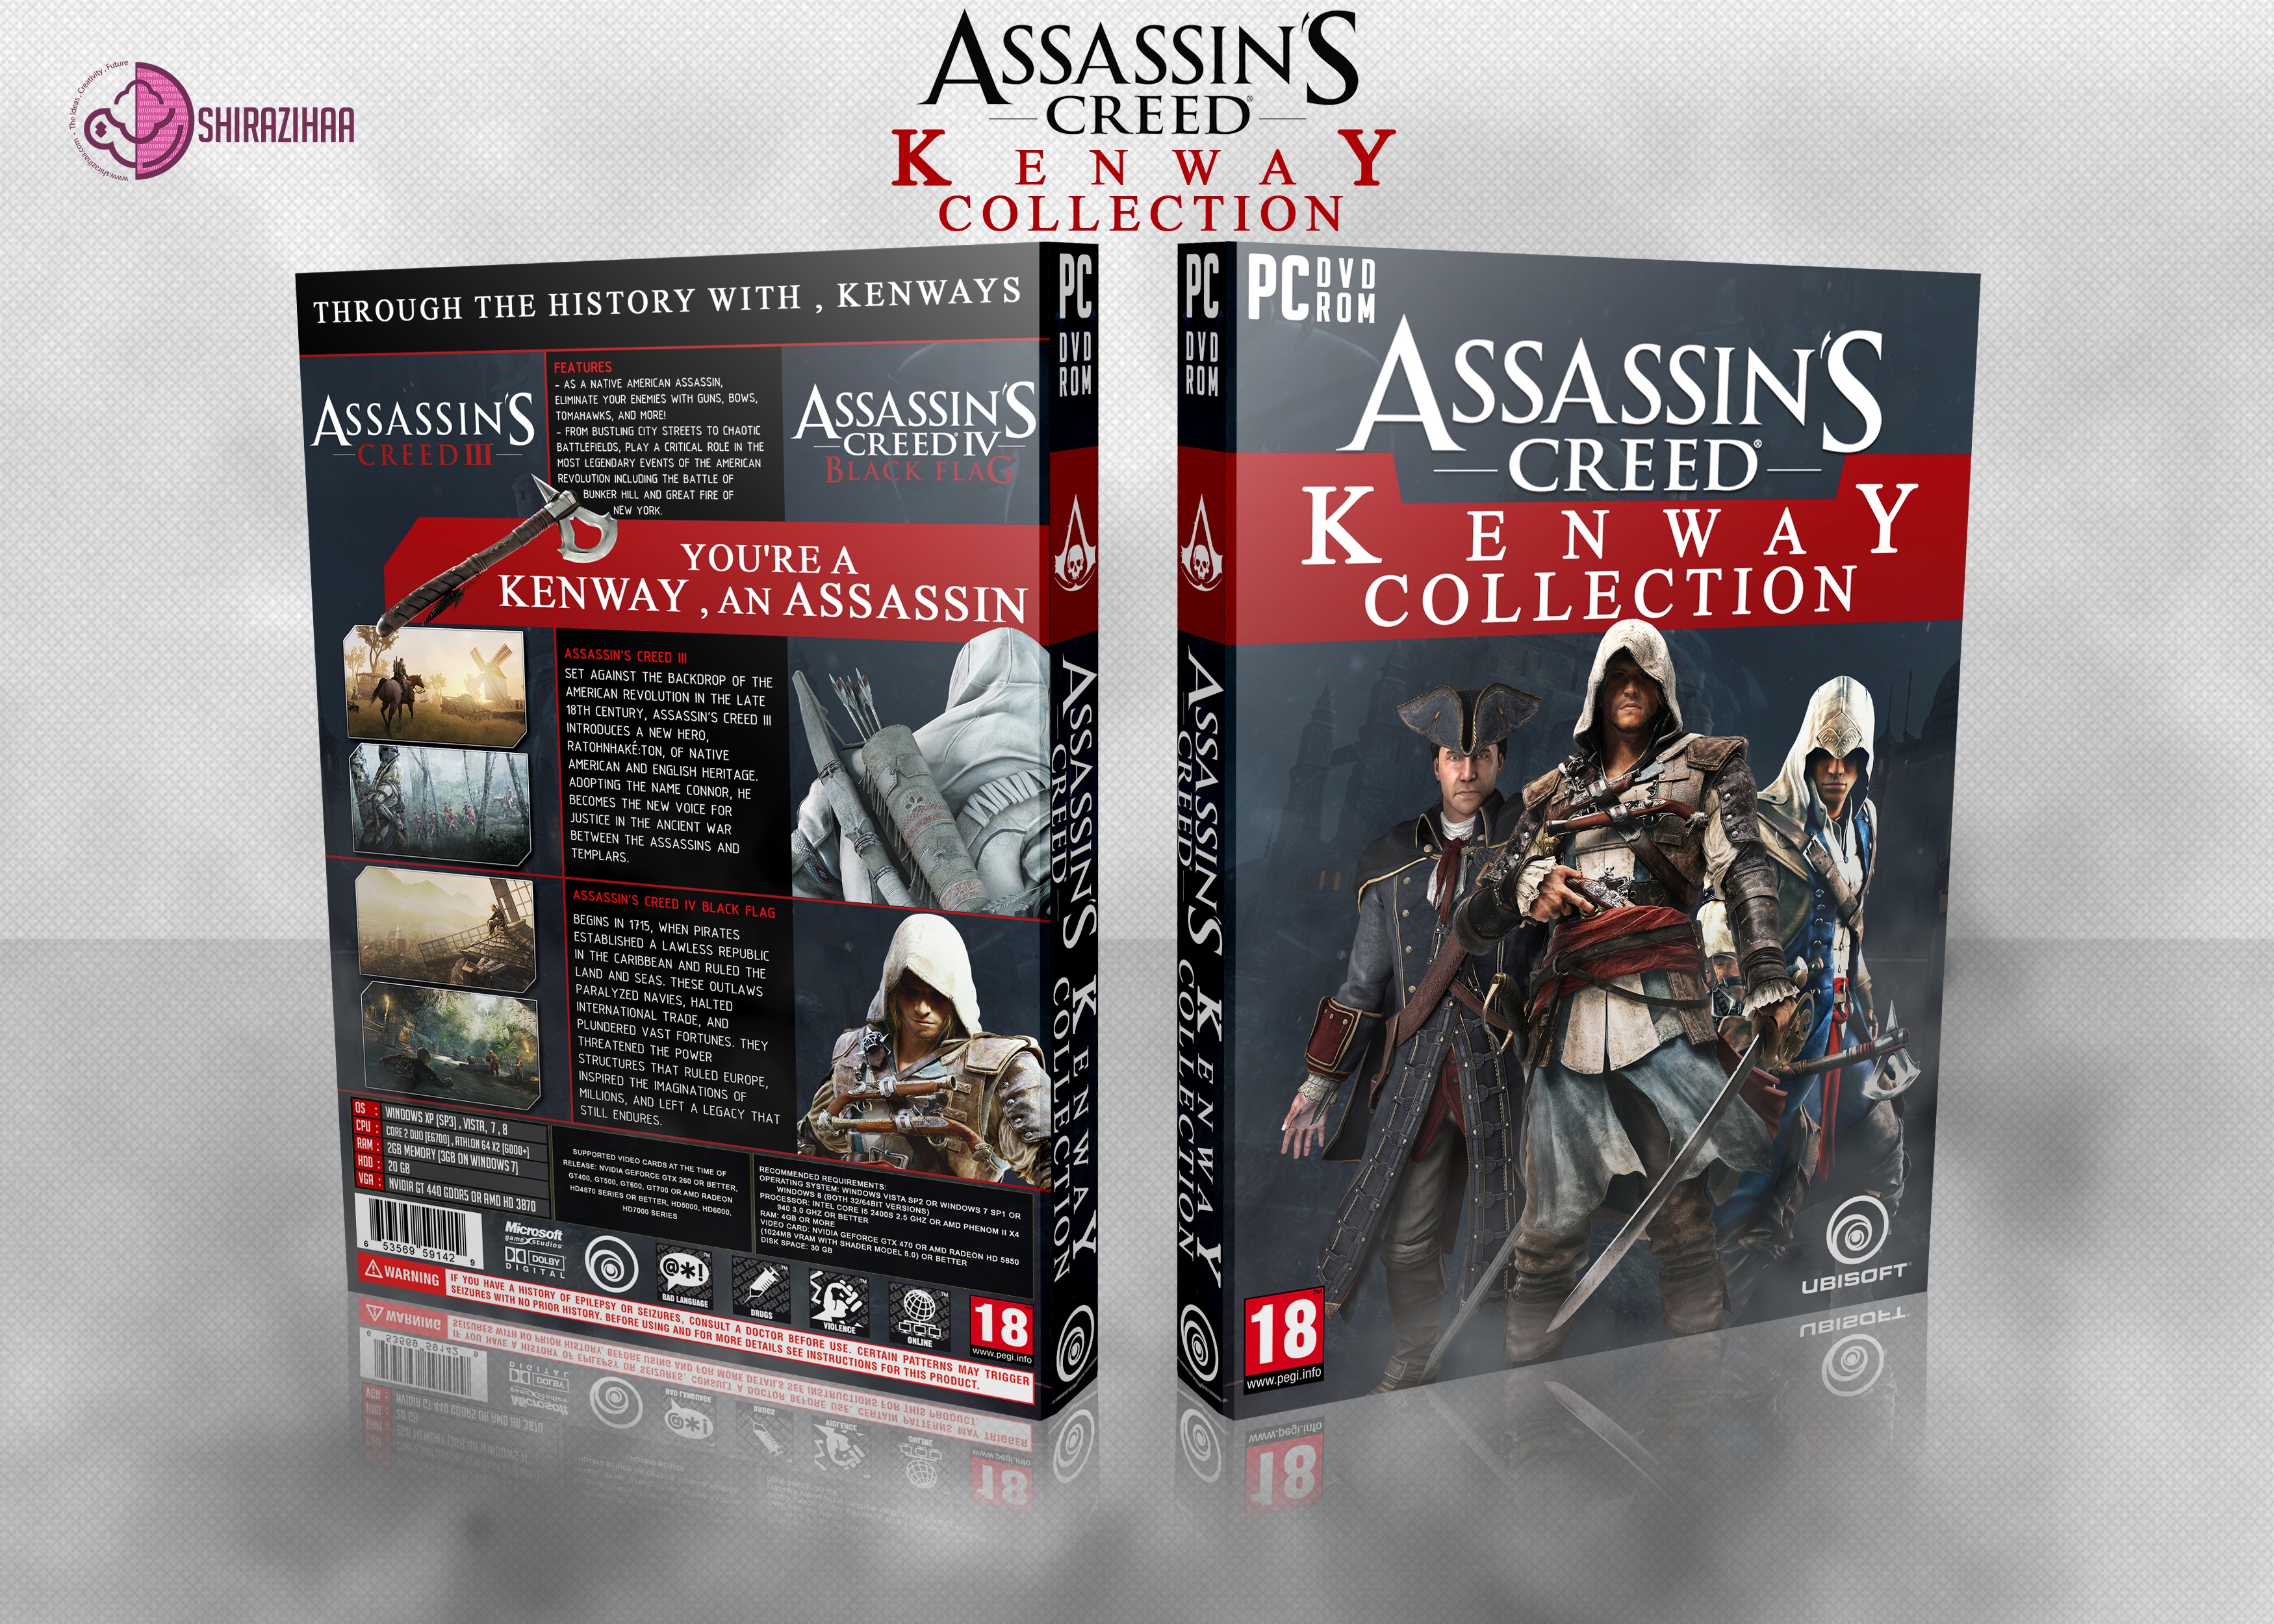 Assassin's Creed: Kenway Collection box cover